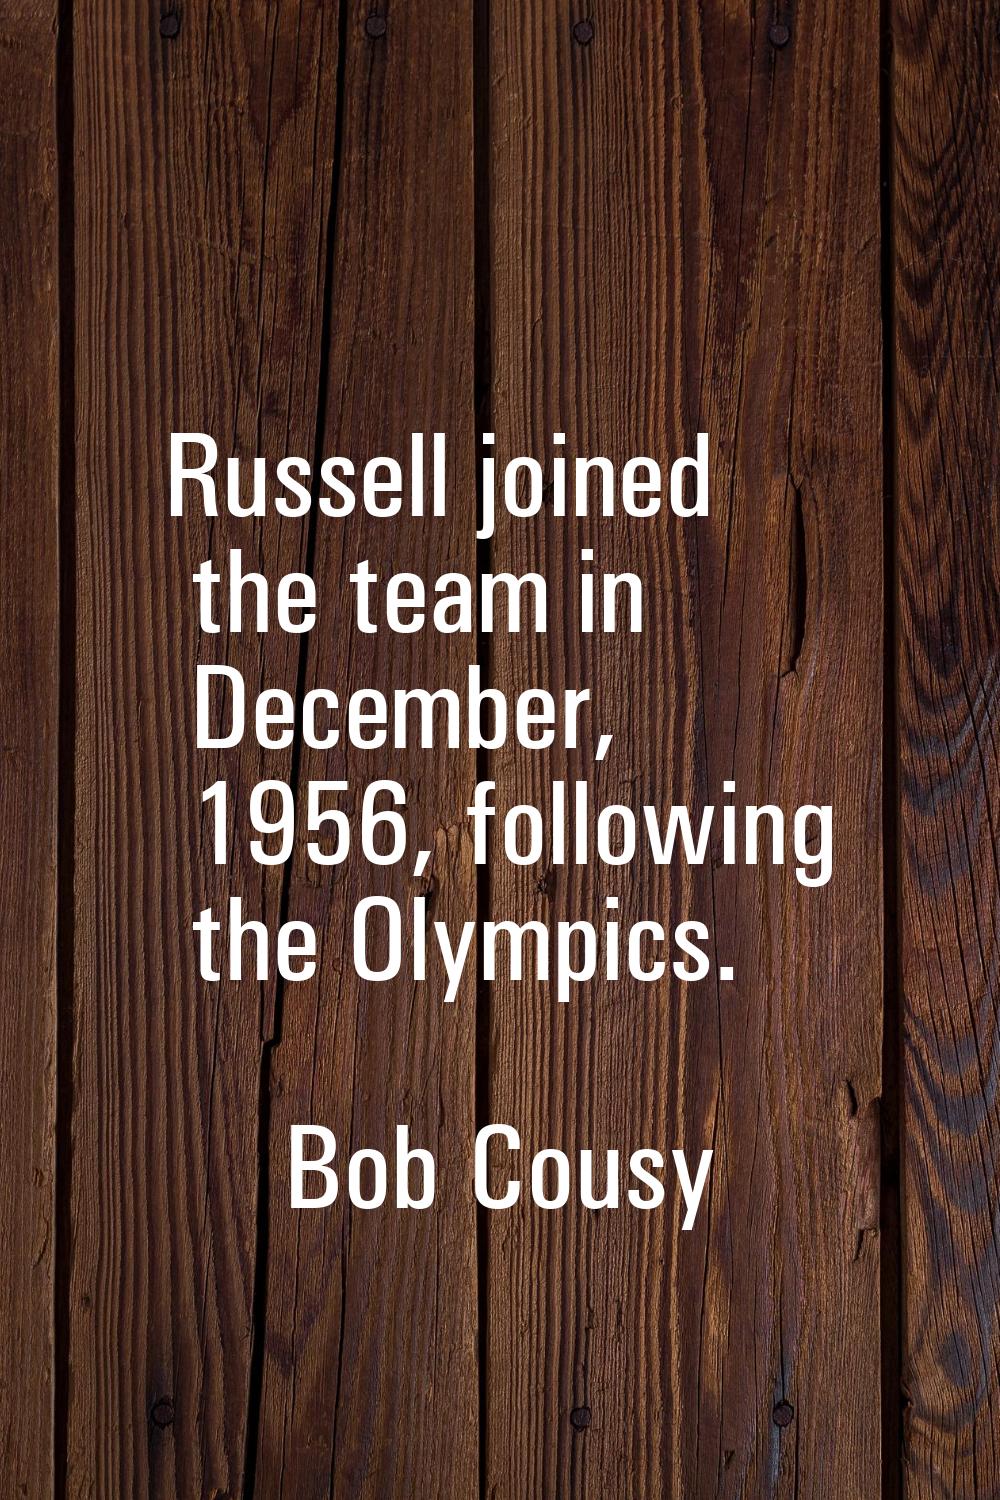 Russell joined the team in December, 1956, following the Olympics.